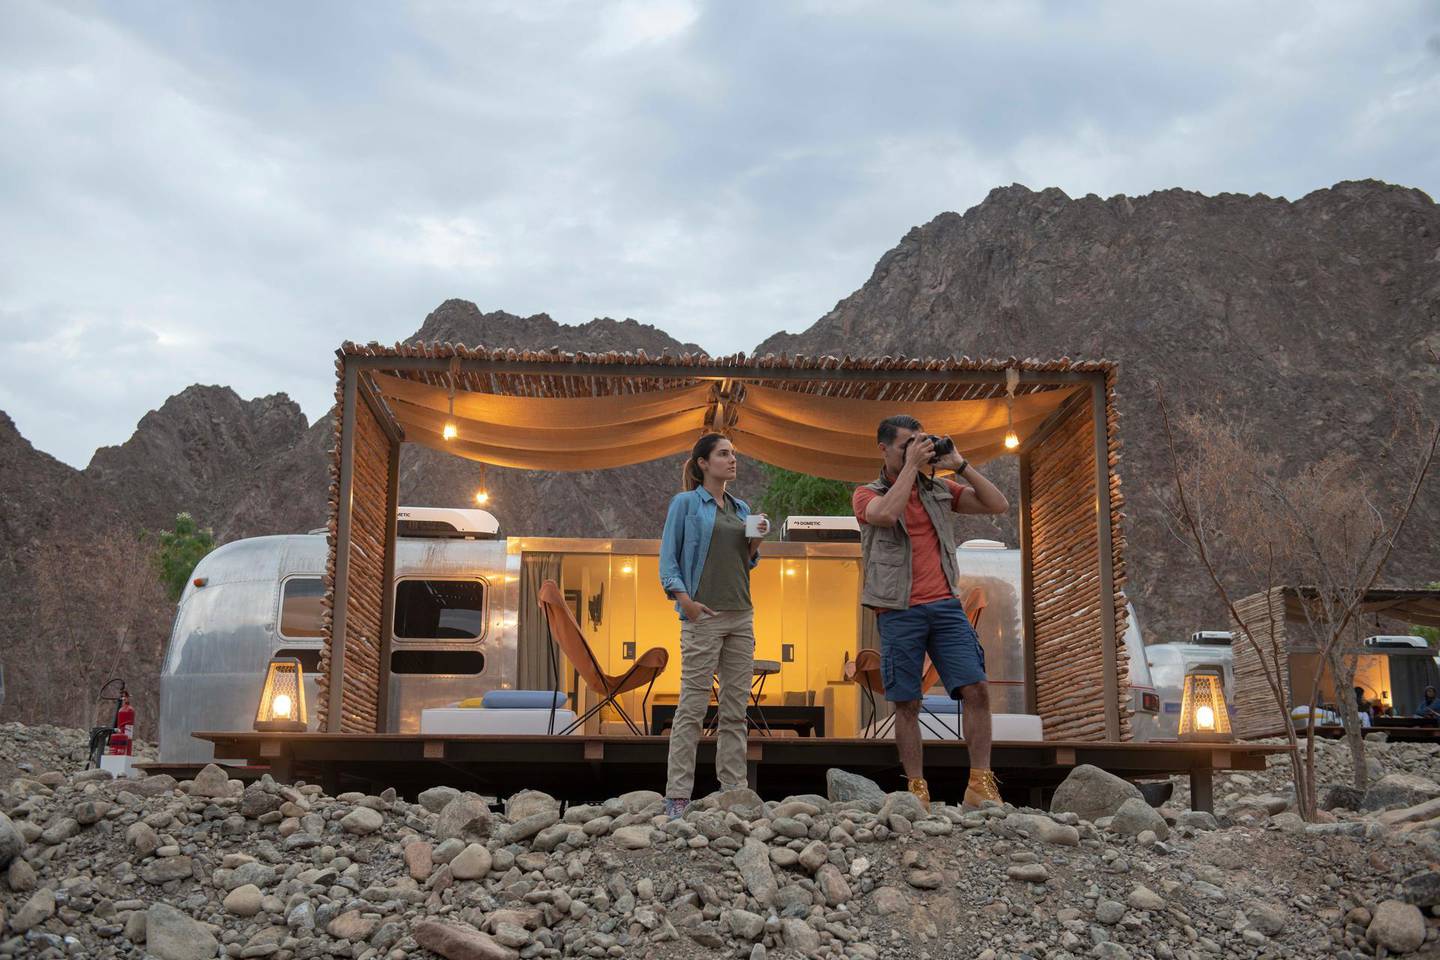 Hatta Resorts have also reopened with trailers, lodges or camping options. Courtesy Meraas